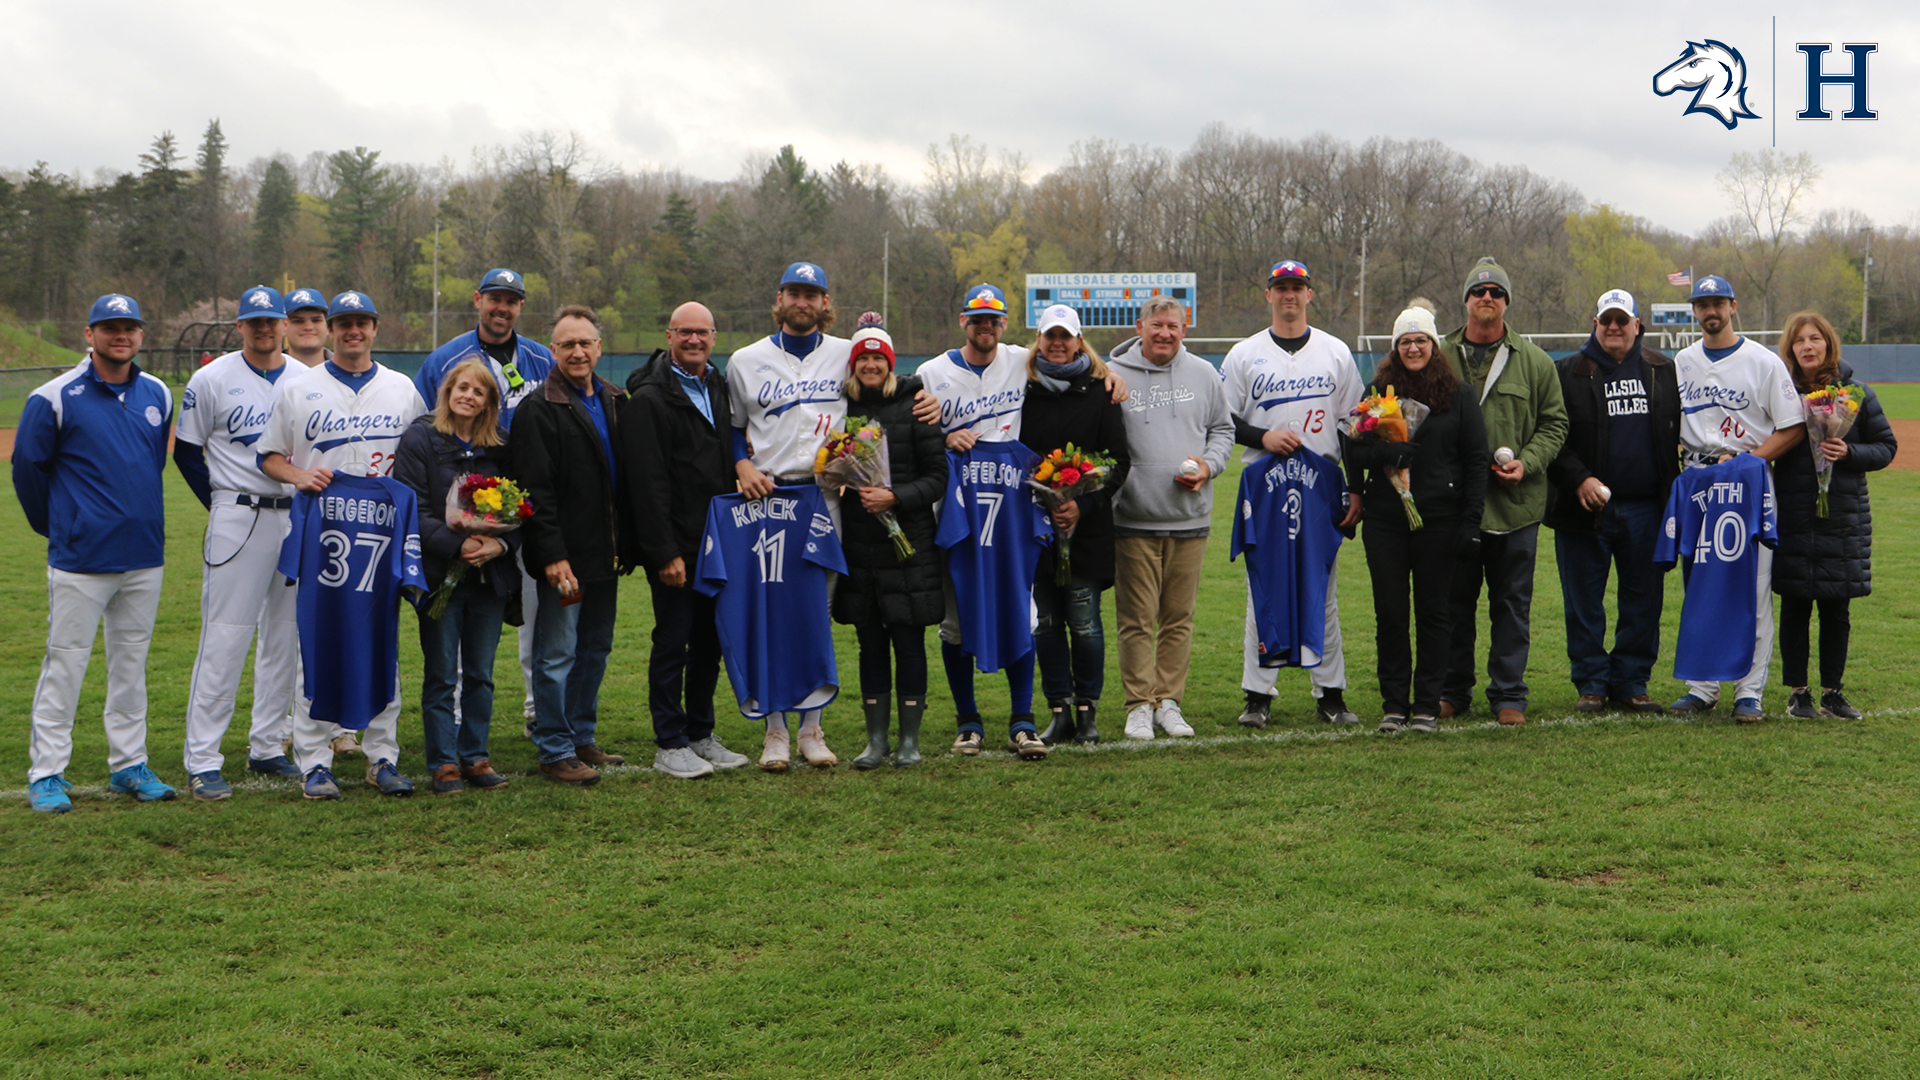 Chargers win on Senior Day, remain alive in G-MAC tourney race heading into final day